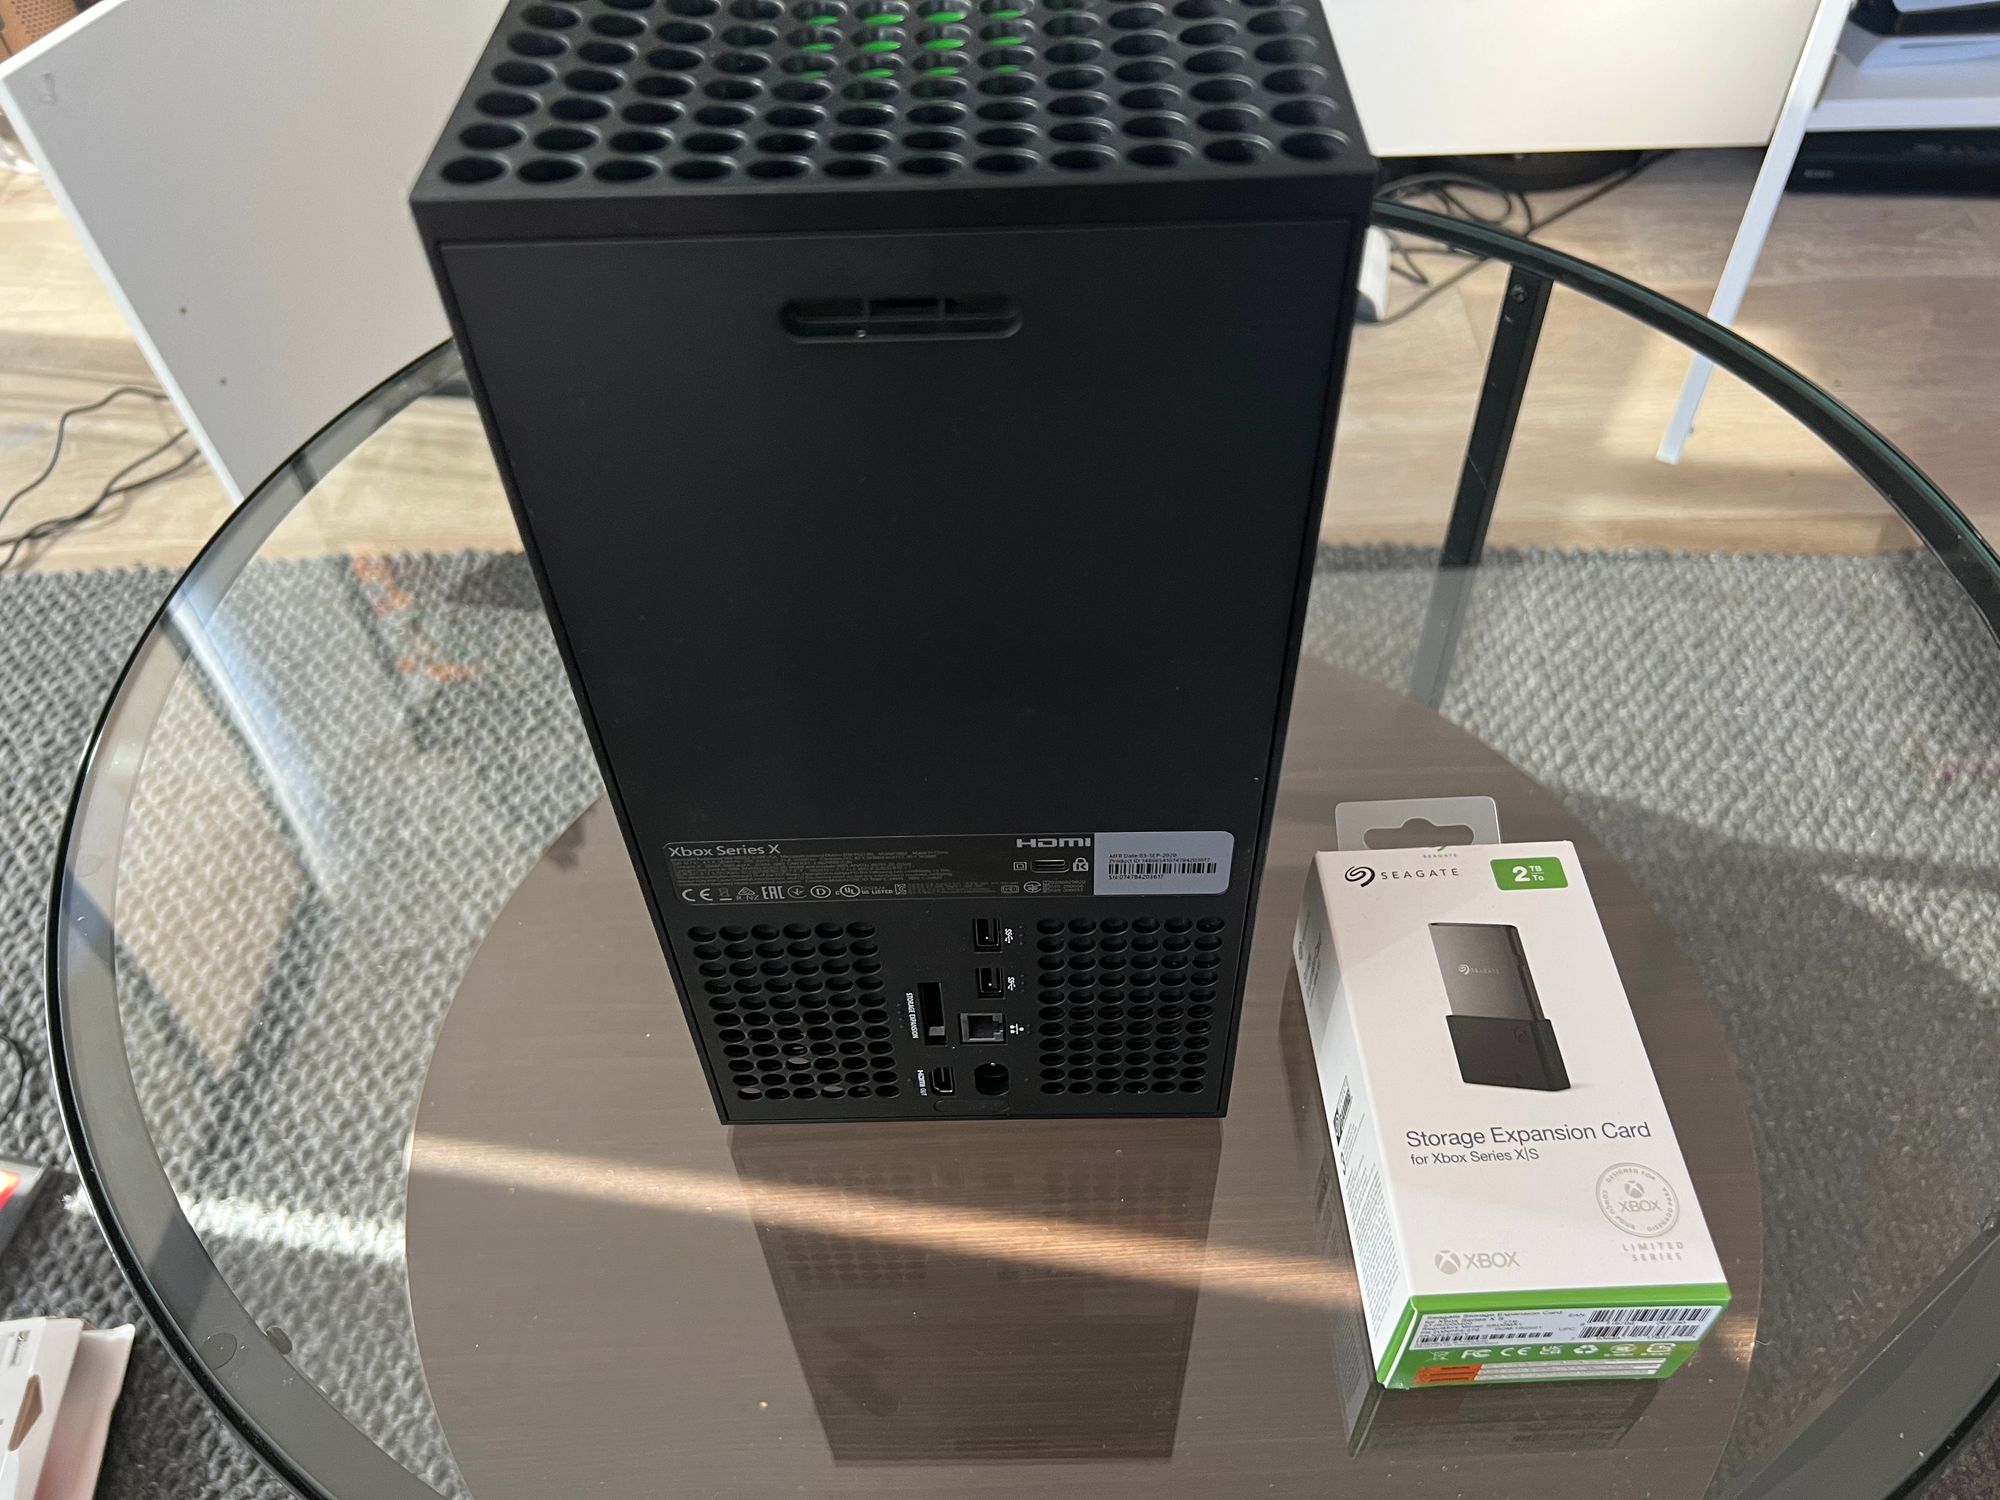 It's the same scratched glass coffee table, but this time there's a big, black, Xbox Series X on it next to a box containing a 2TB Seagate Storage Expansion Card for Xbox.